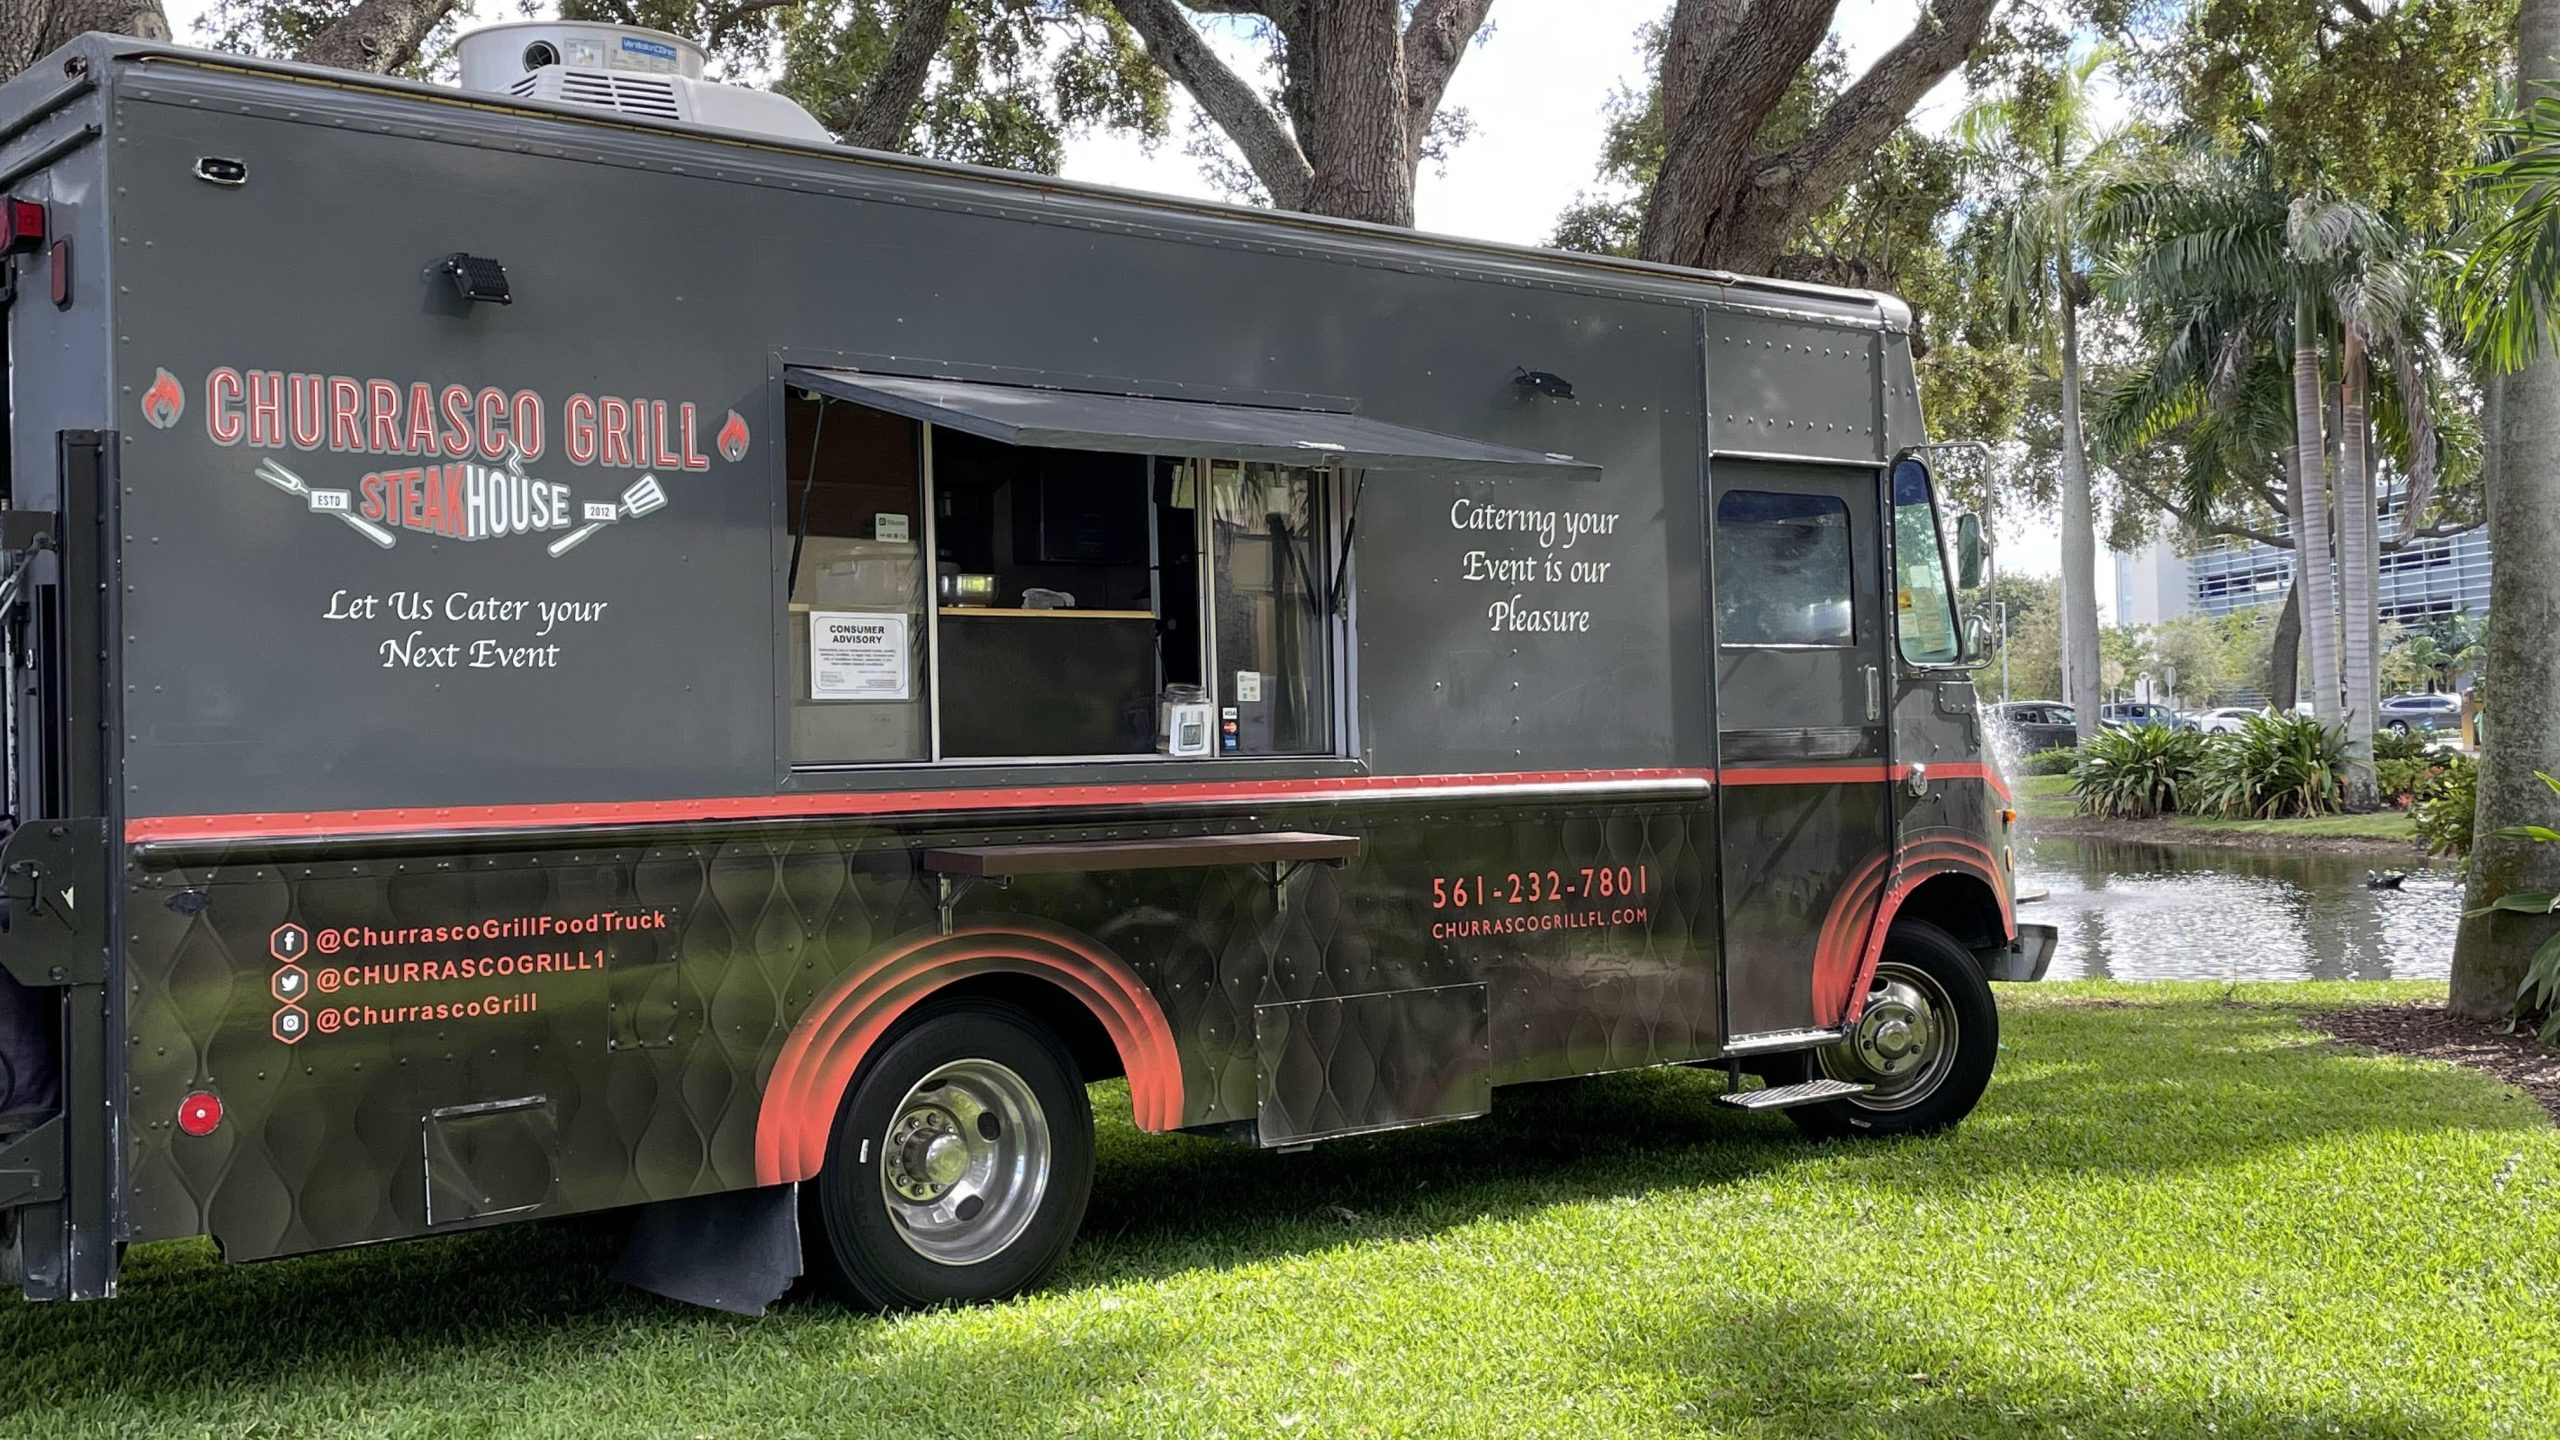 Churrasco Grill Catering & Food Truck